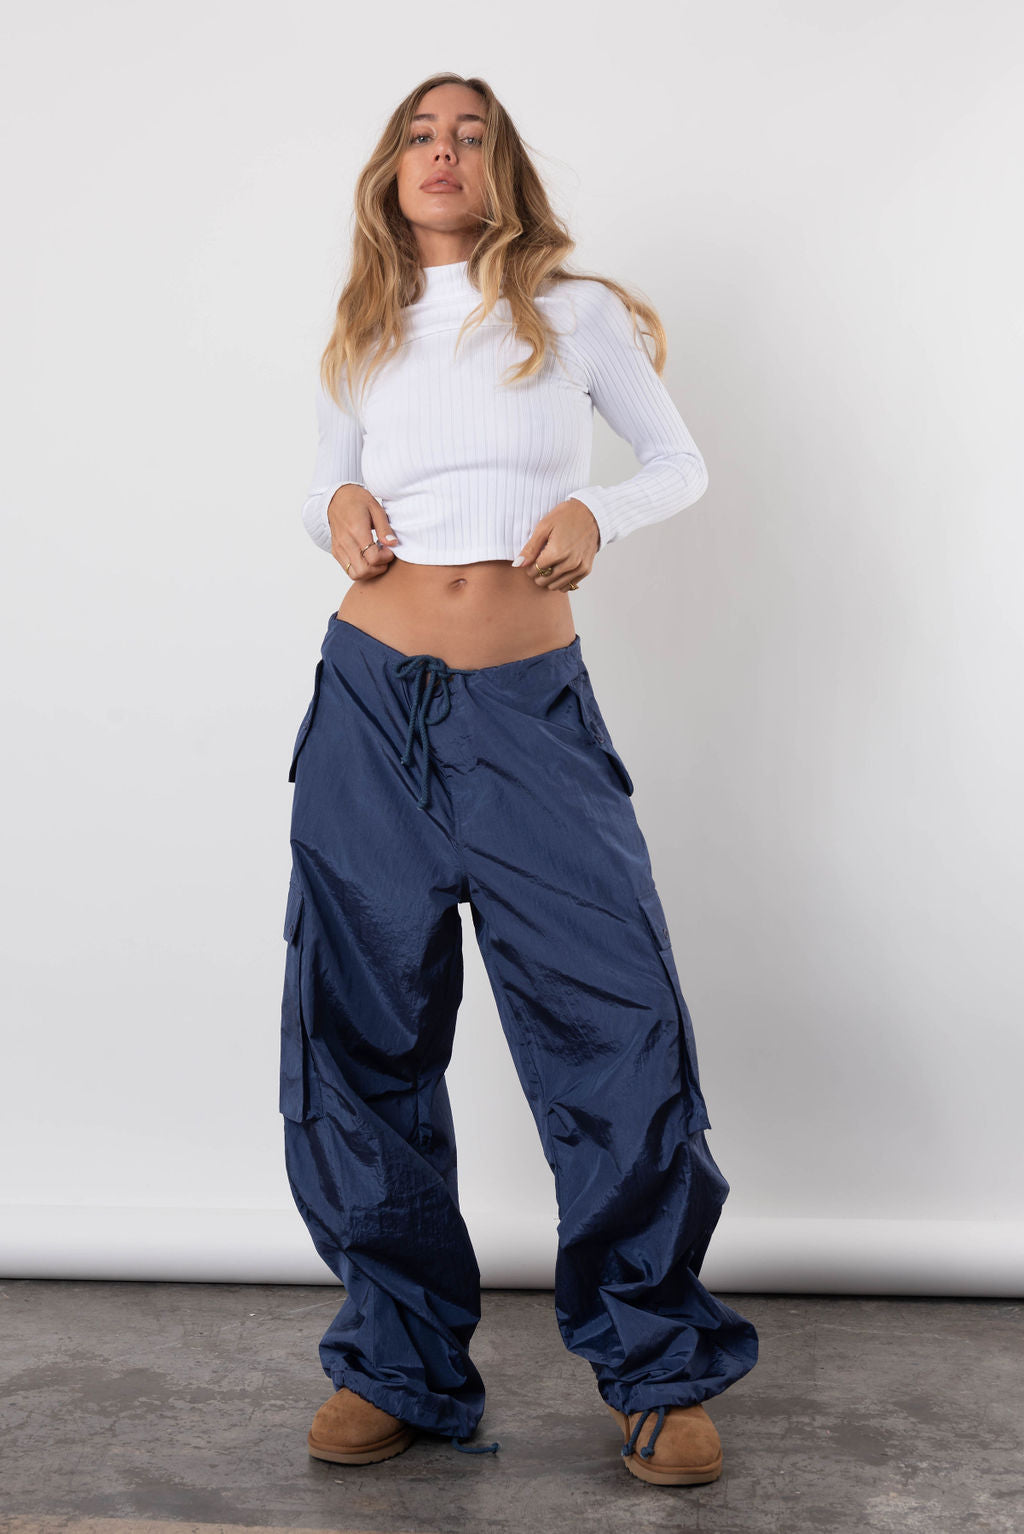 Parachute pants are the latest element of Y2K fashion to be resurrected